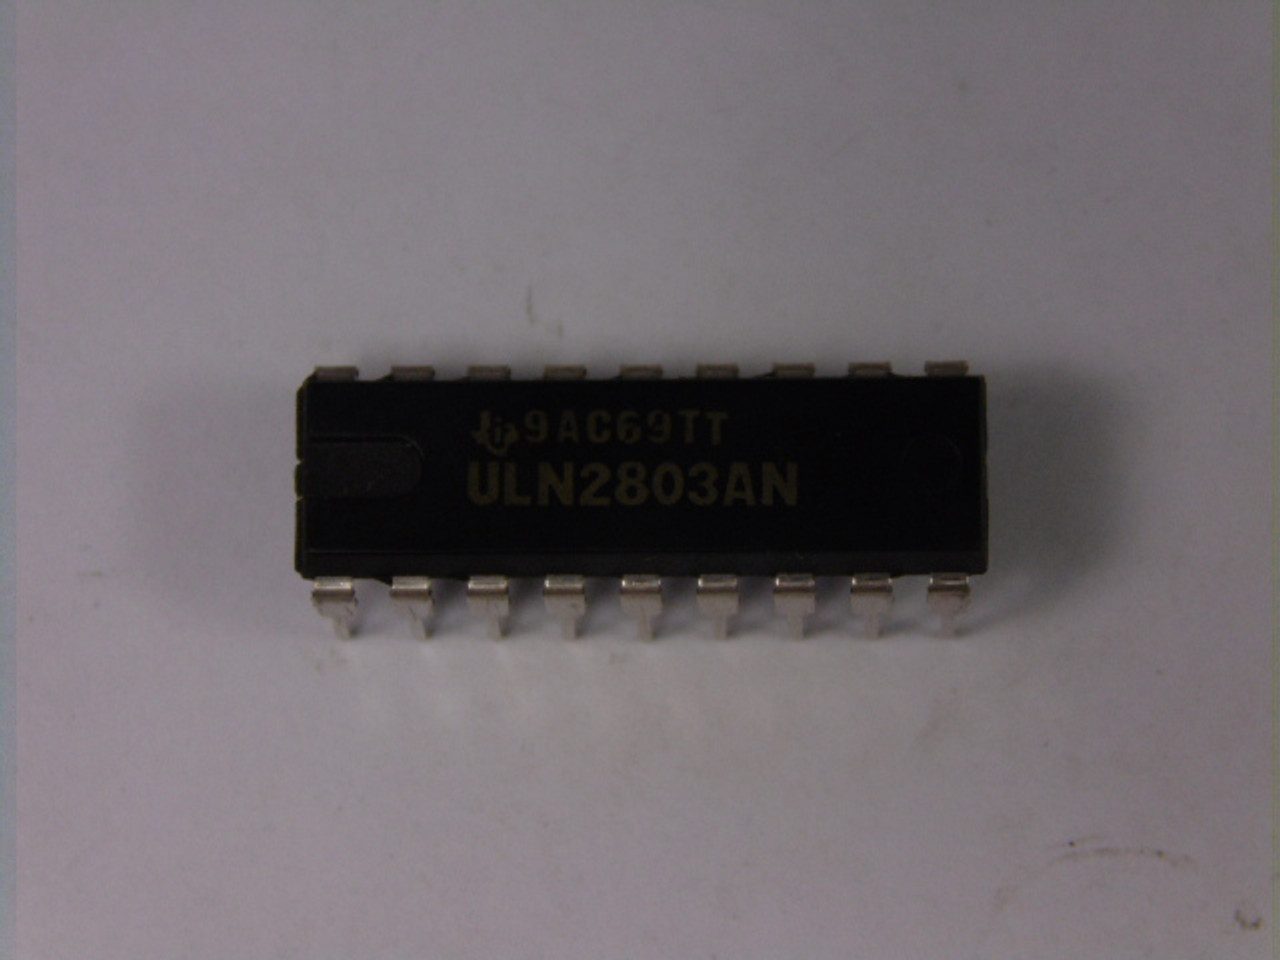 Texas Instraments ULN2803AN Transistor Array USED